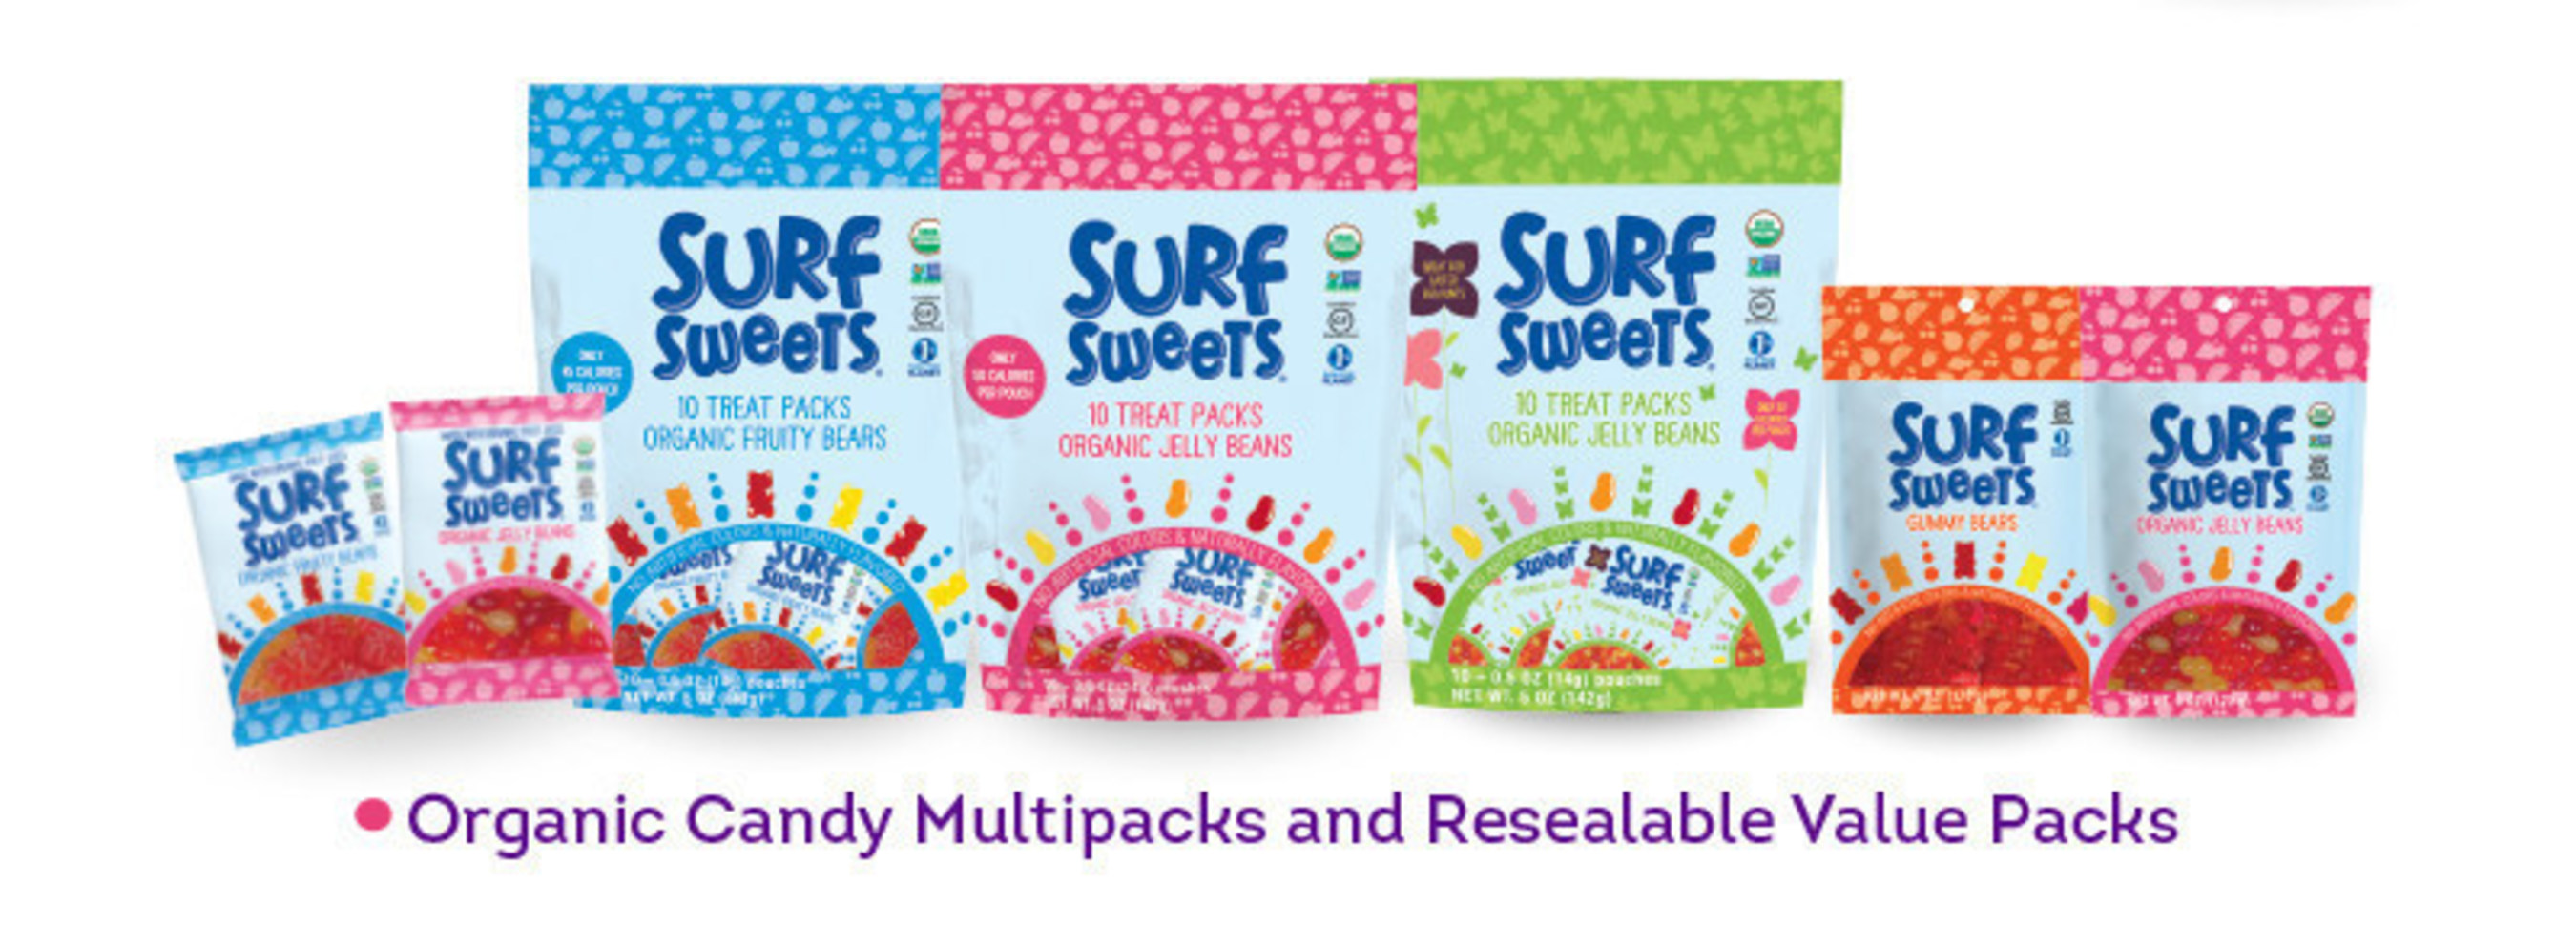 For families with food allergies, it makes life easier to bring trusted allergy-friendly brands on-the-go. Surf Sweets has made this easier by putting its most popular candies like Gummy Bears and Organic Jelly Beans into 6 ounce value packs with a resealable closure, perfect for portion controlled snacking and travel. Other new items are the Surf Sweets organic candy multipacks for Organic Fruity Bears and Organic Jelly Beans. Each pack contains 10 individually wrapped 0.5 ounce packs of candy that are perfect for an on-the-go snack or for sharing among friends or classmates. There is even a pastel Springtime multipack.